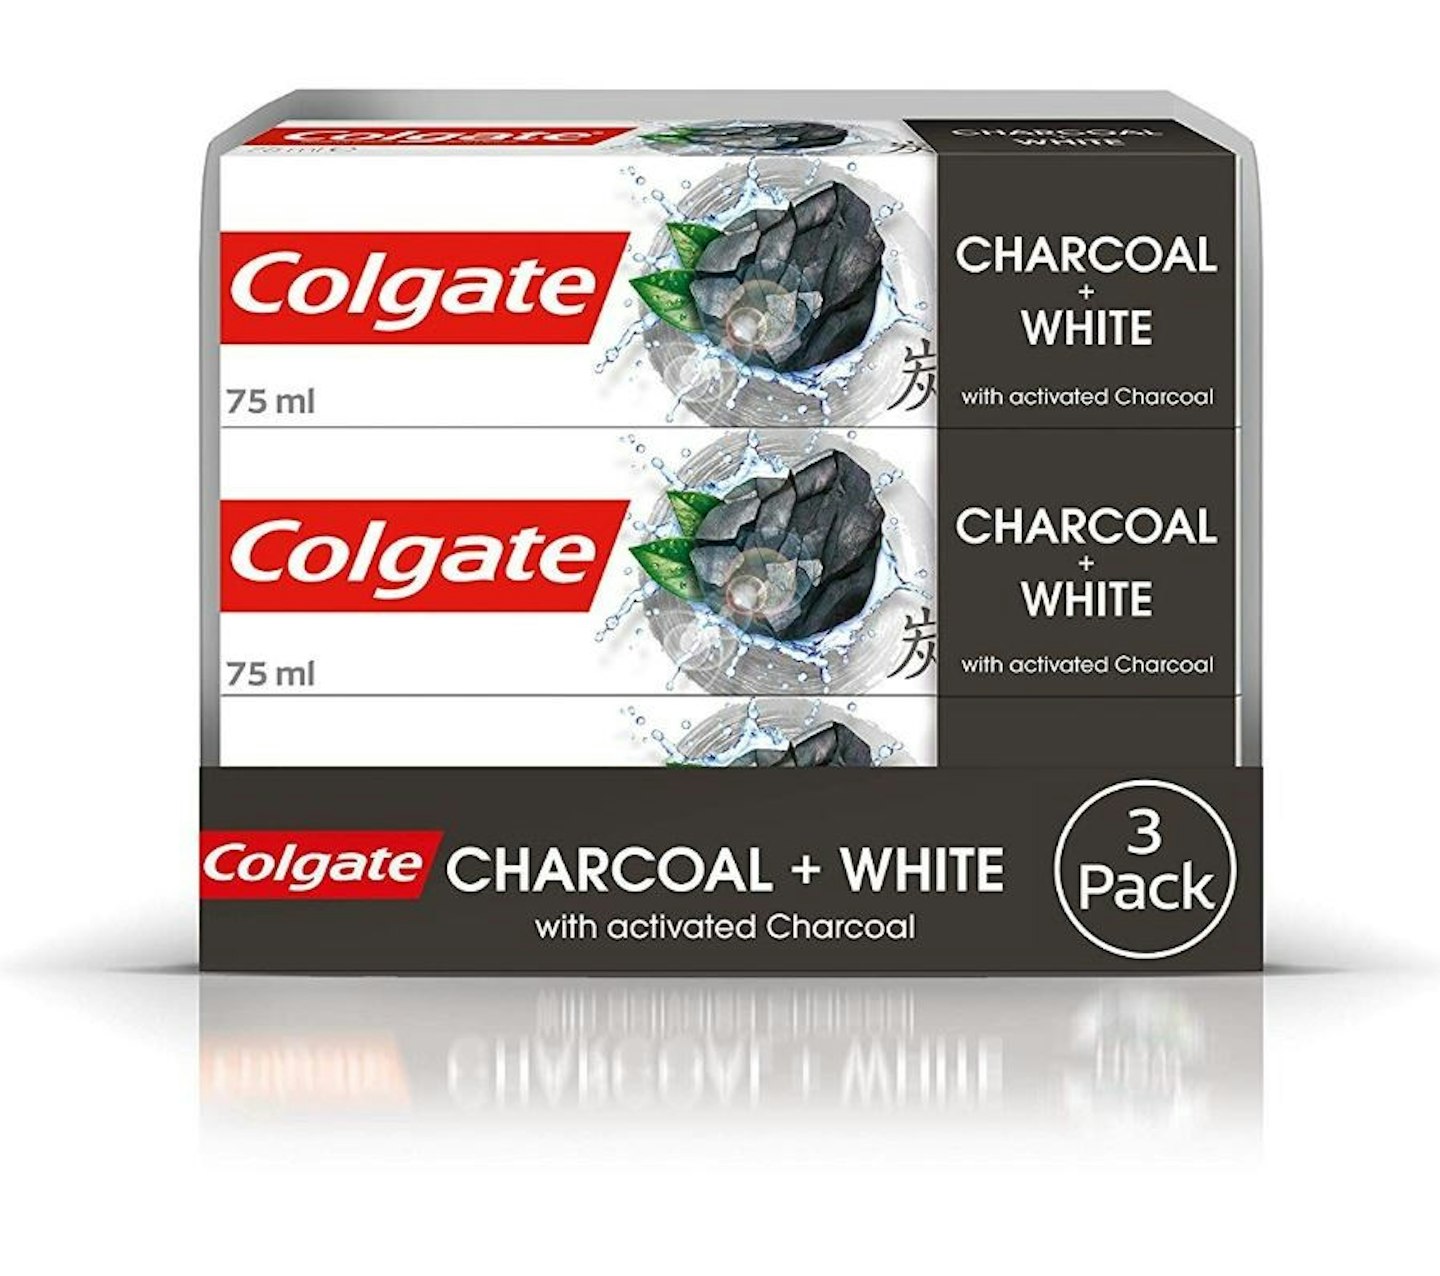 Colgate Natural Extracts Activated Charcoal + White Mint Toothpaste